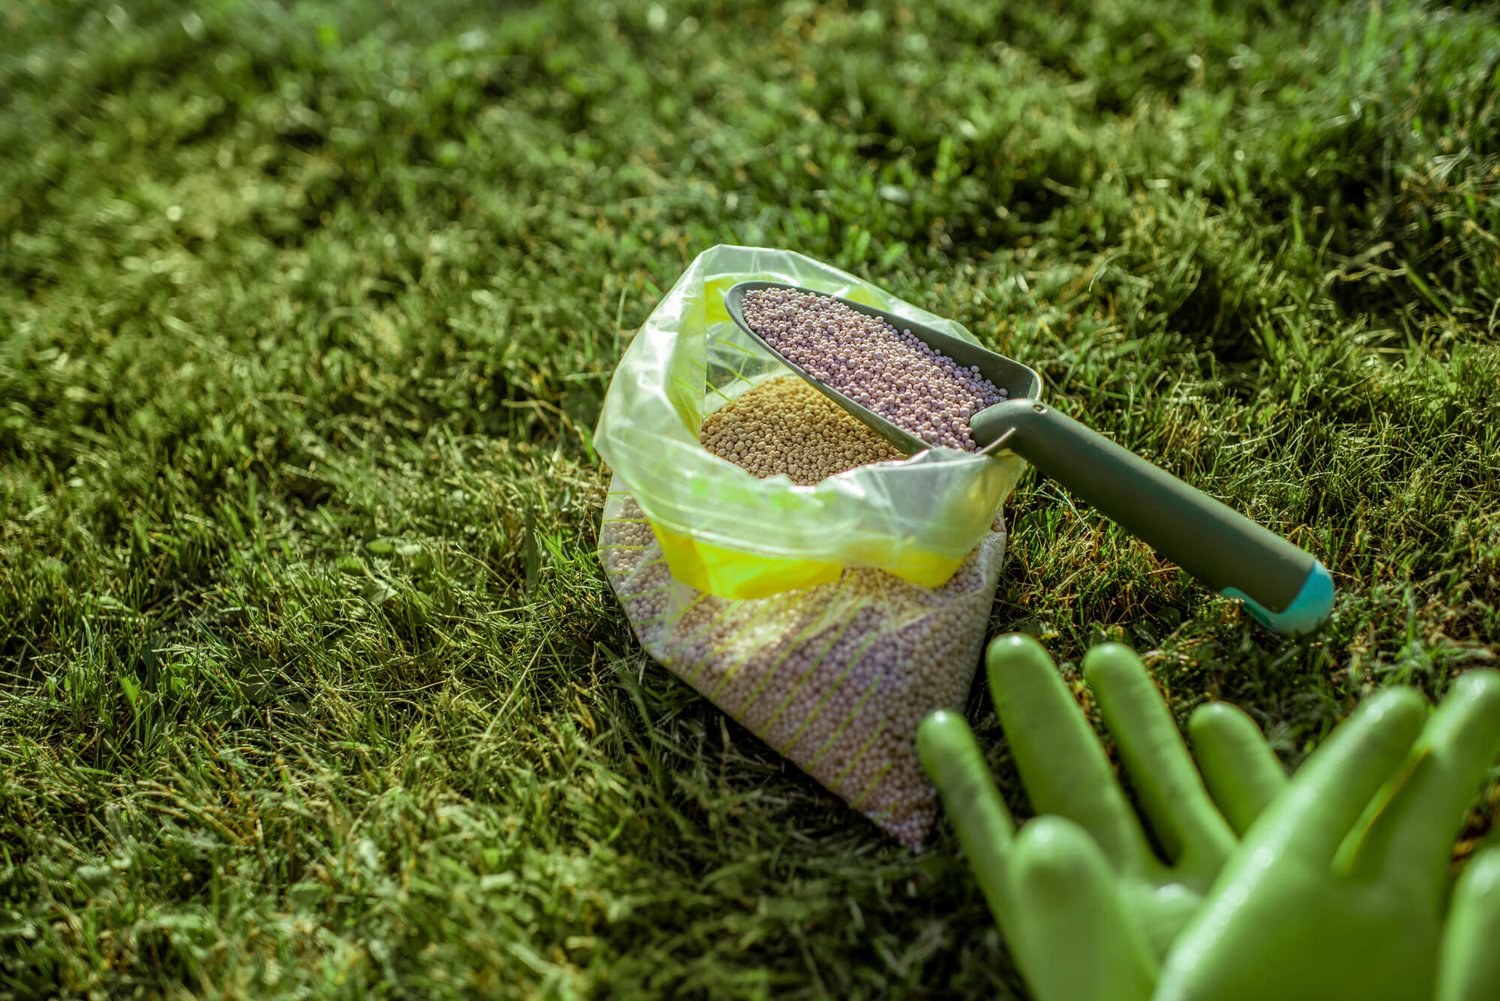 How To Dispose Of Old Lawn Fertilizer